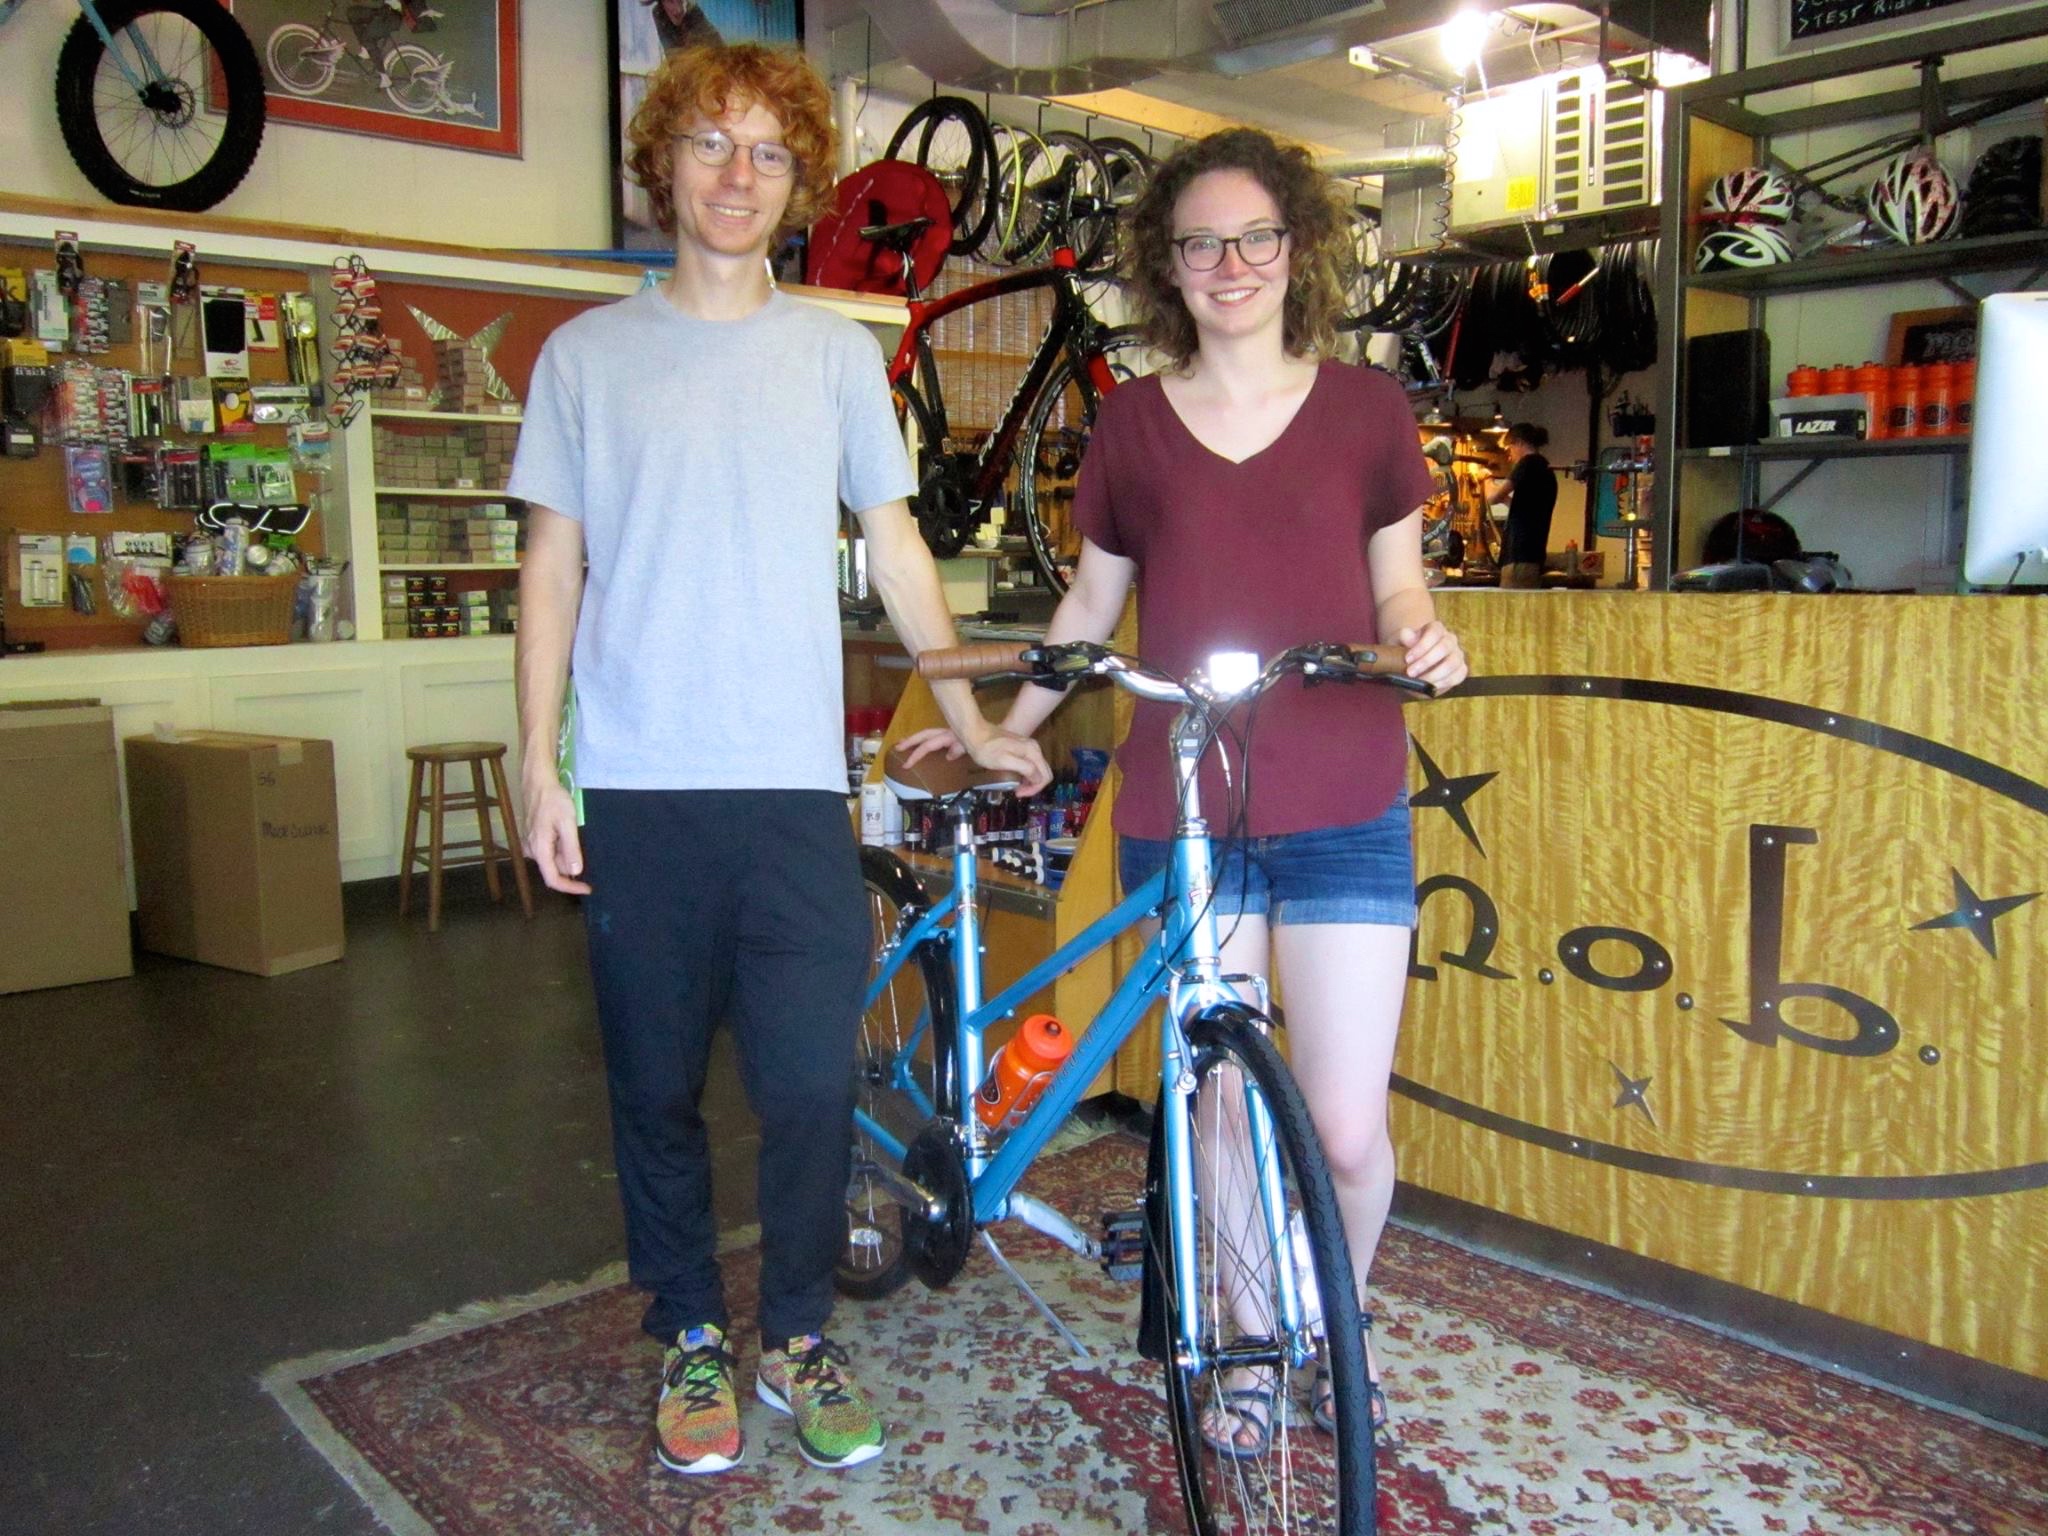 Keenan and Katie with Katie’s new Bianchi Torino. Katie had fenders installed on her beautiful Bianchi Bicycle. Look for her riding to class and going places around town. Looking Good!